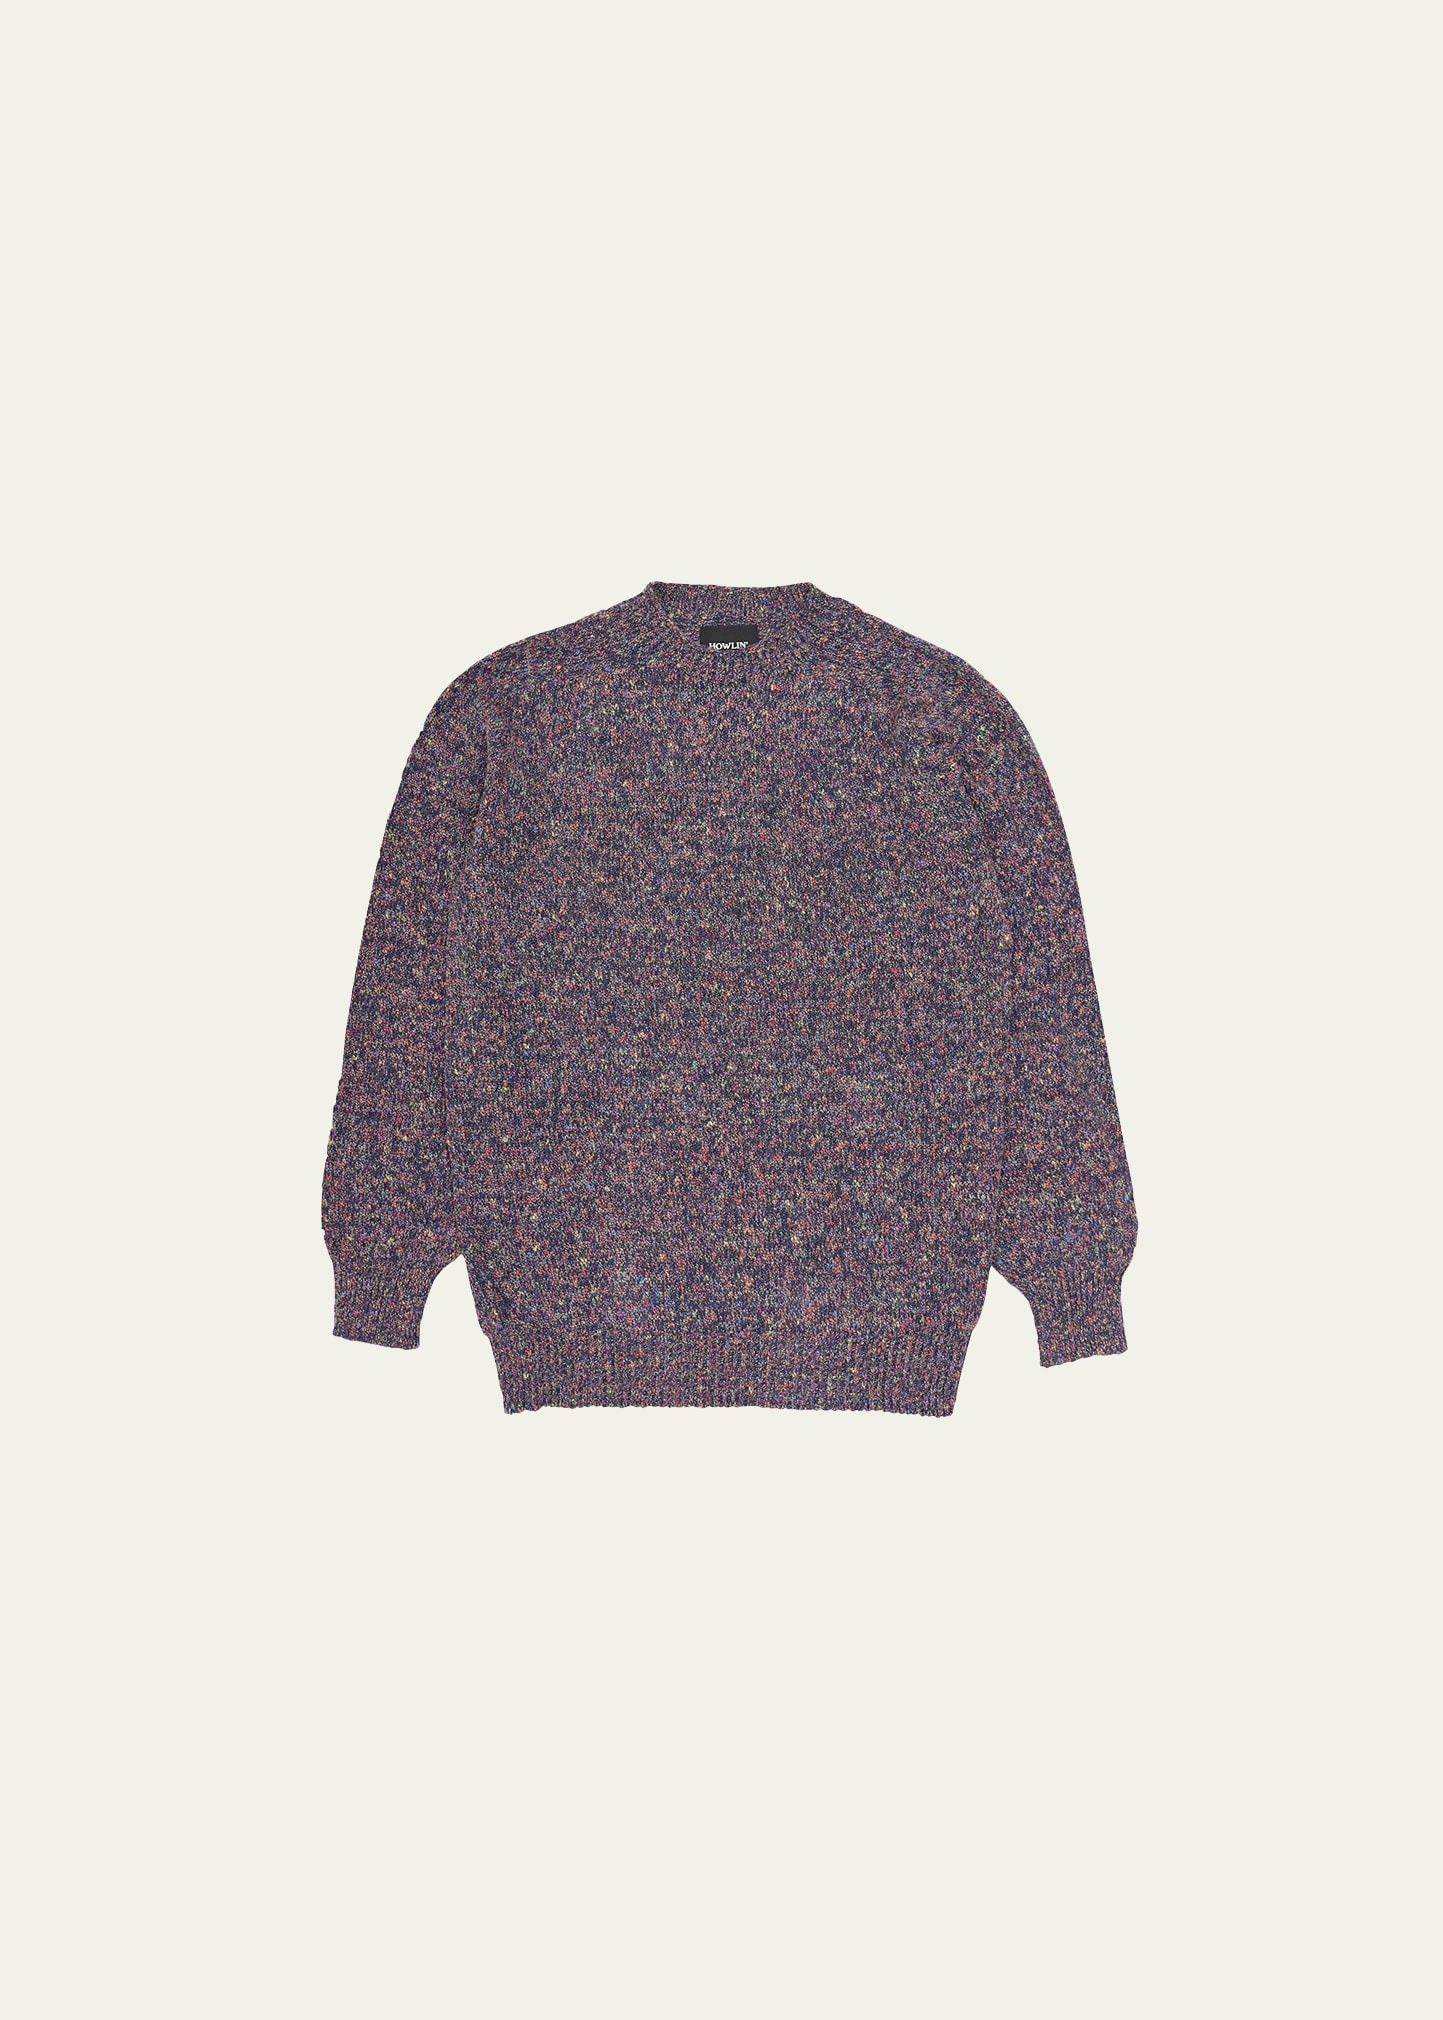 Howlin' Men's Marled Crew Sweater In Navy Fire Mix